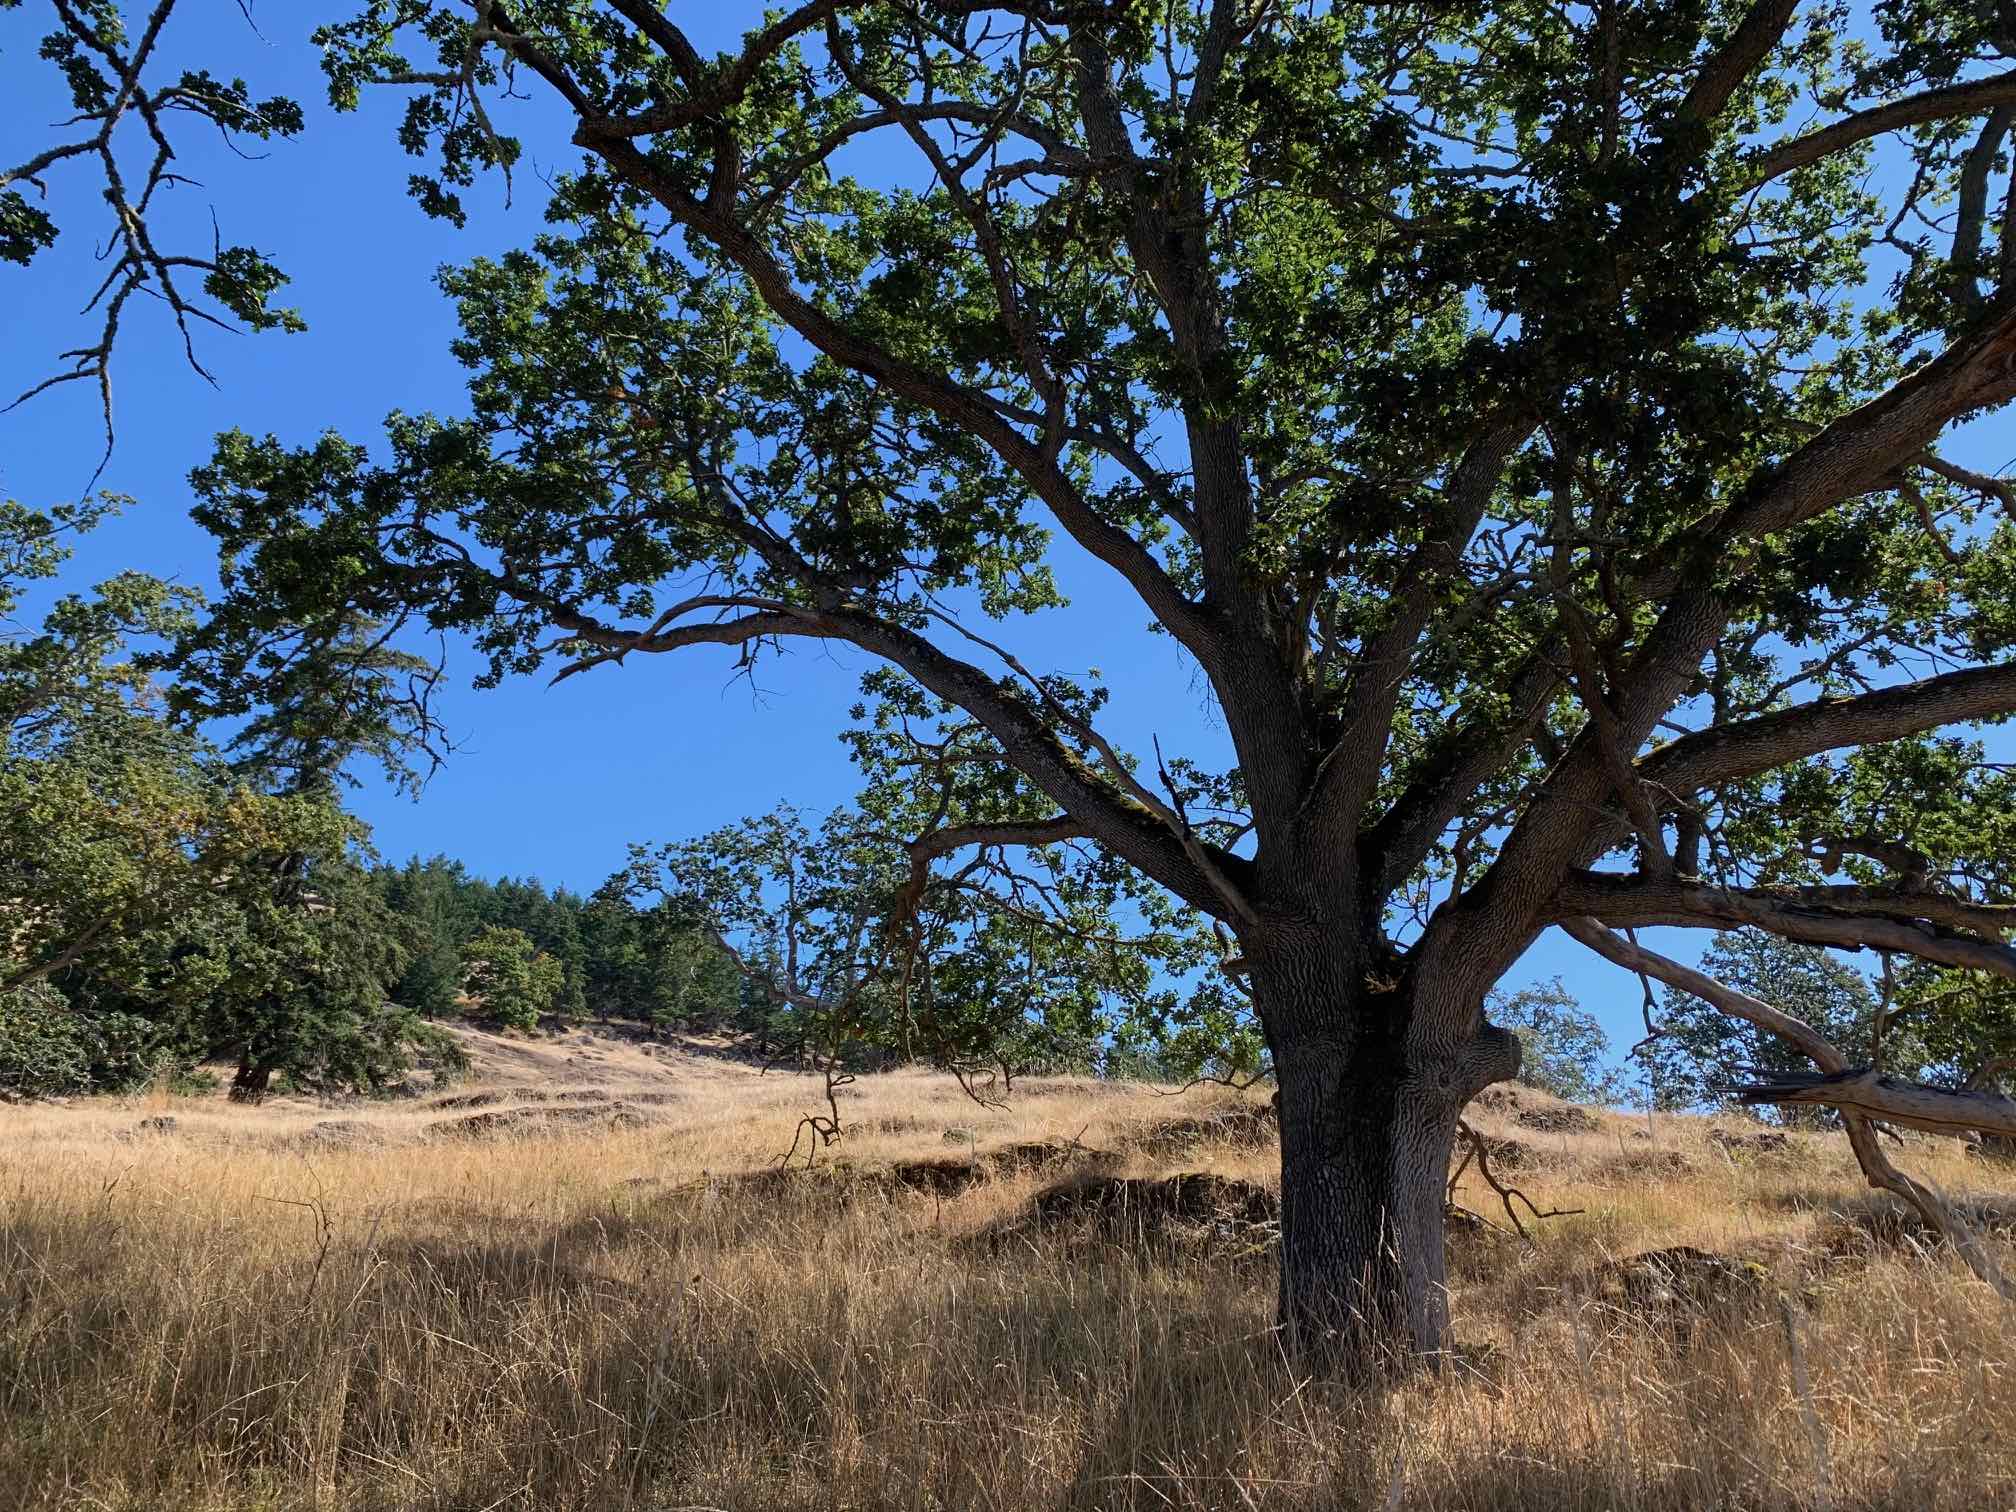 A remnant Indigenous fire-managed oak savanna, Pacific Northwest, USA. Image credit: Michael Coughlan.